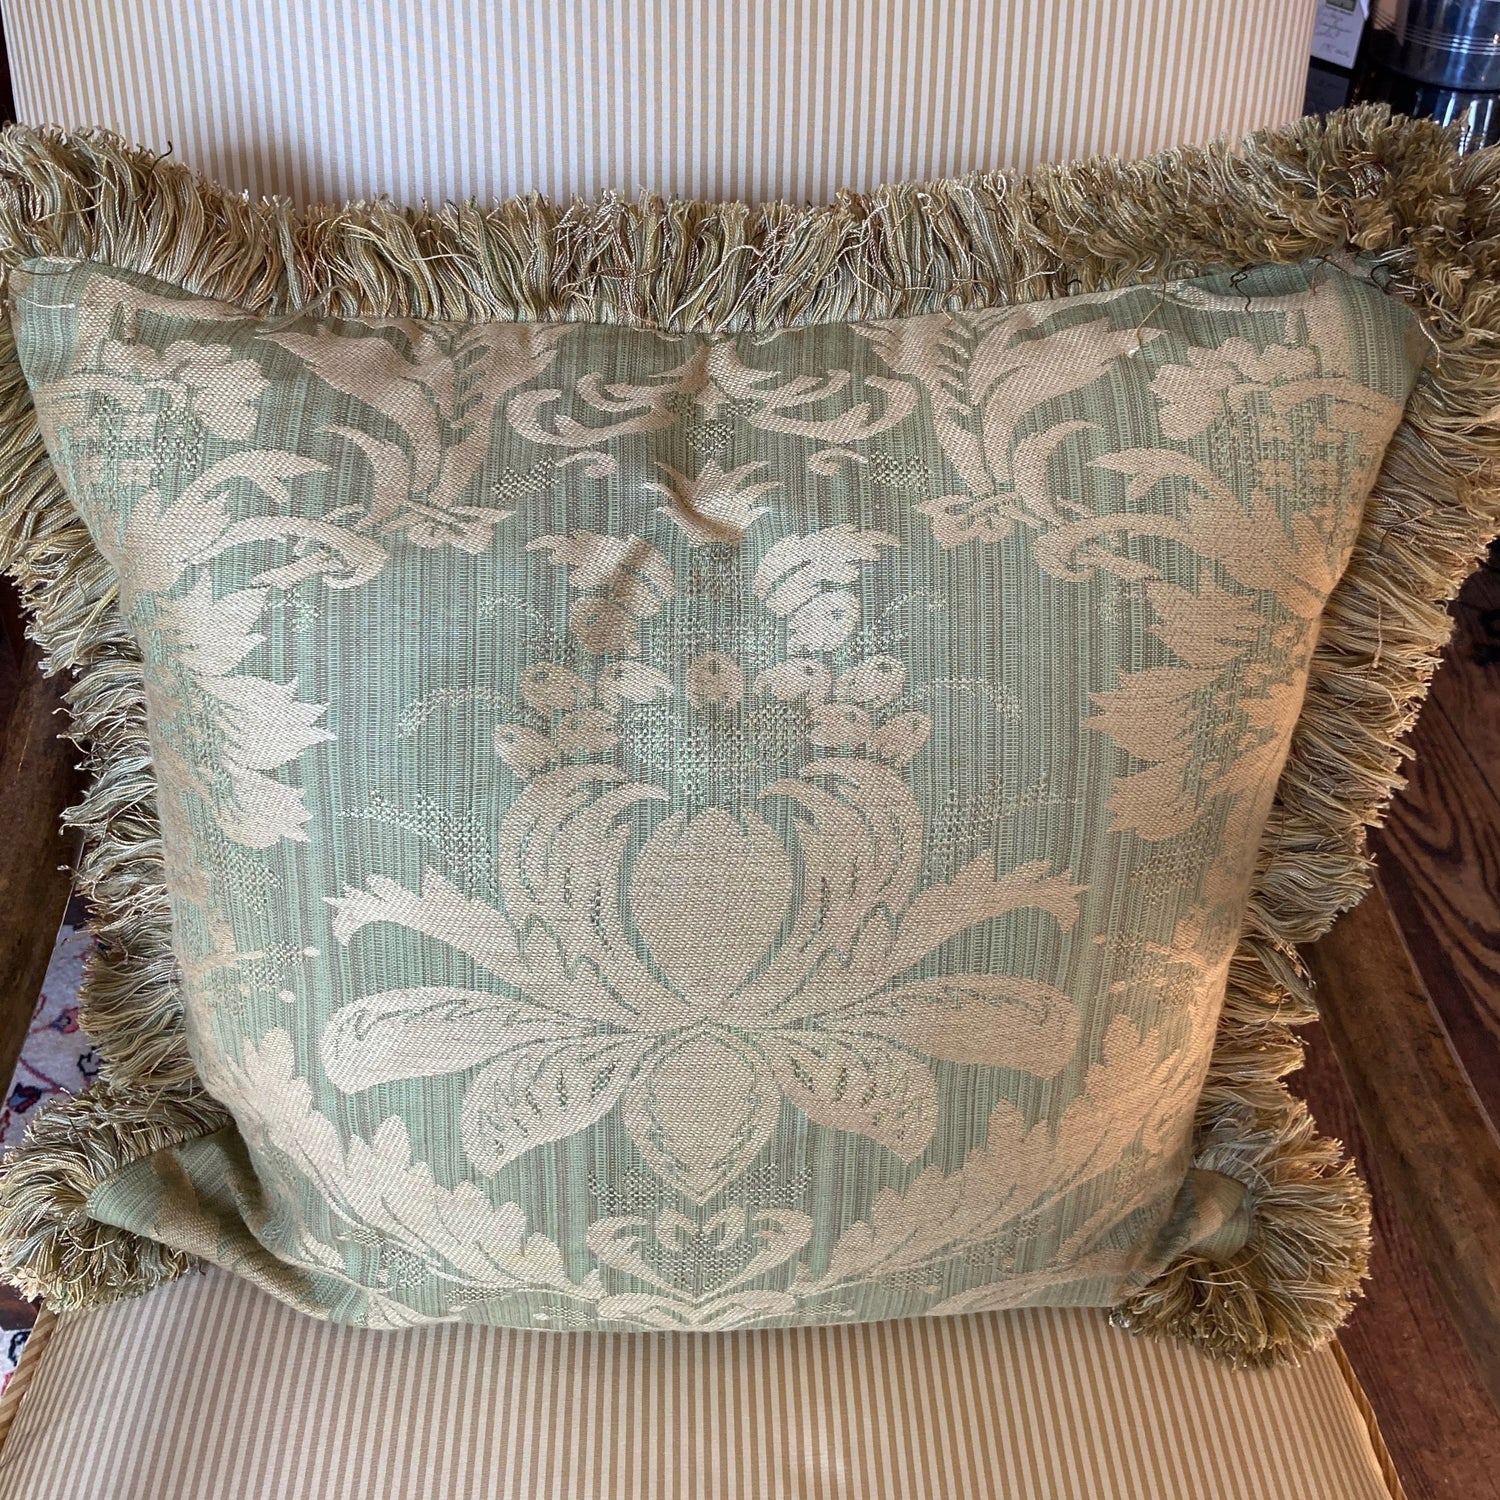 Brunschwig Green Strie Damask 20 X 20 Square Designer Pillow with Down Feather Insert